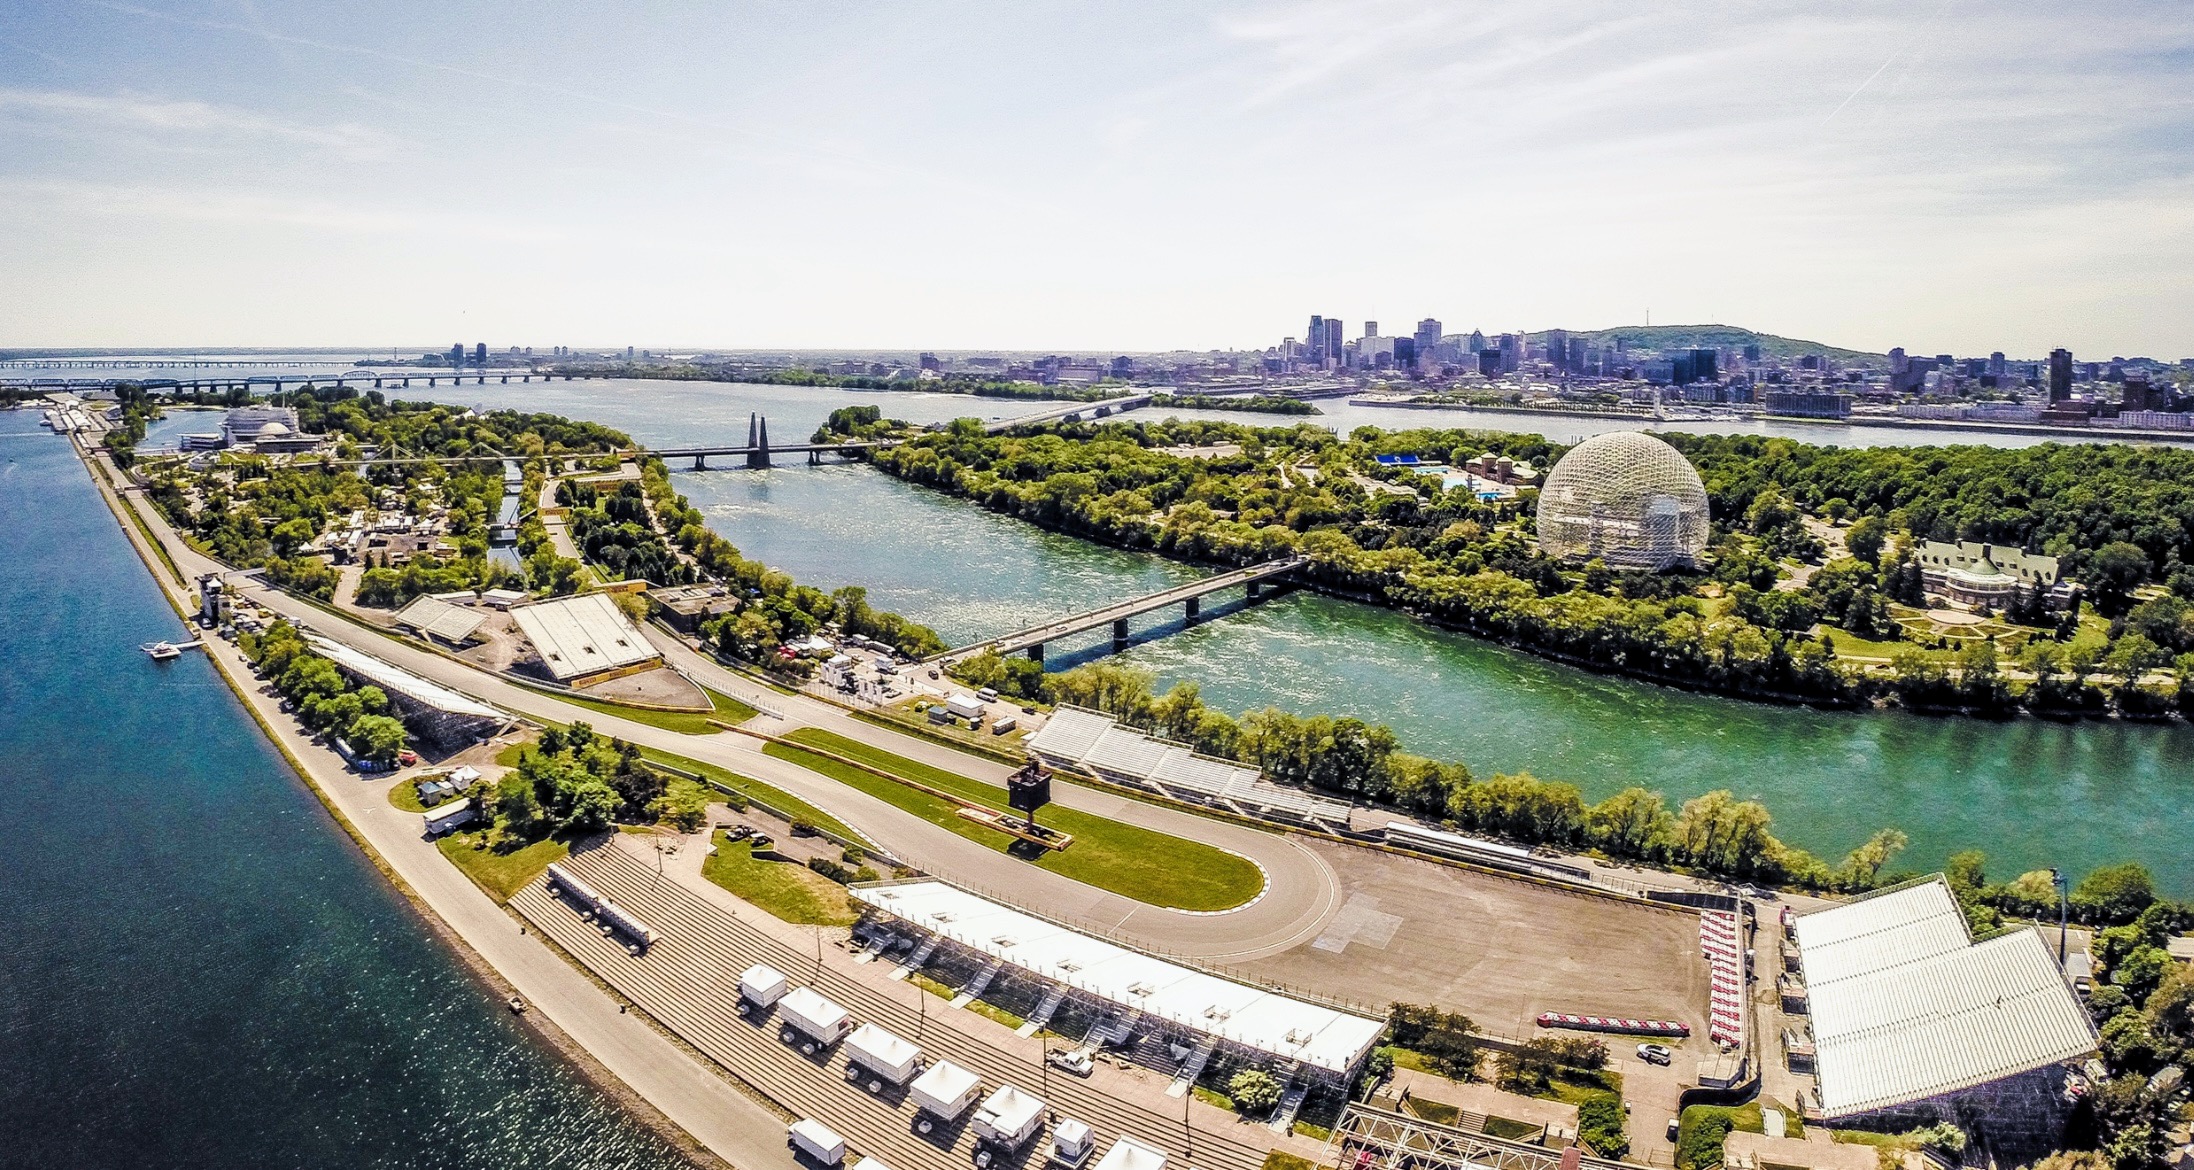 Circuit Gilles-Villeneuve is now open for cycling on Wednesdays & Thursdays from 6 to 10 p.m